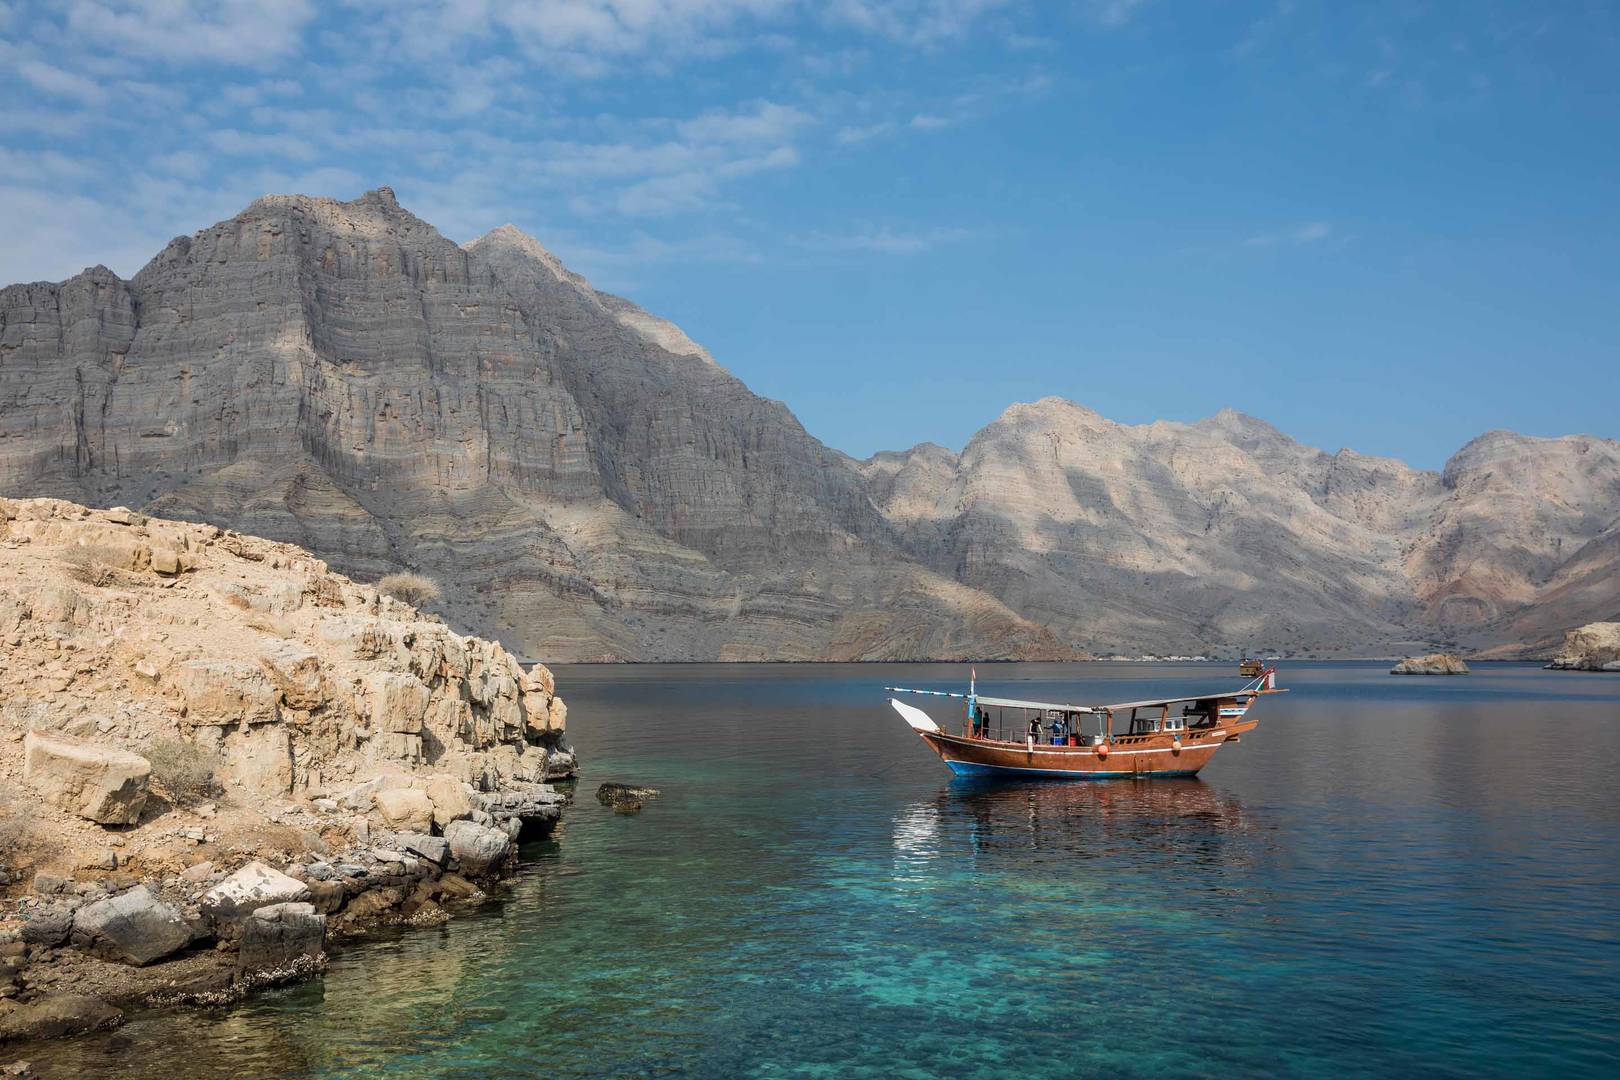 The fjords of Musandam